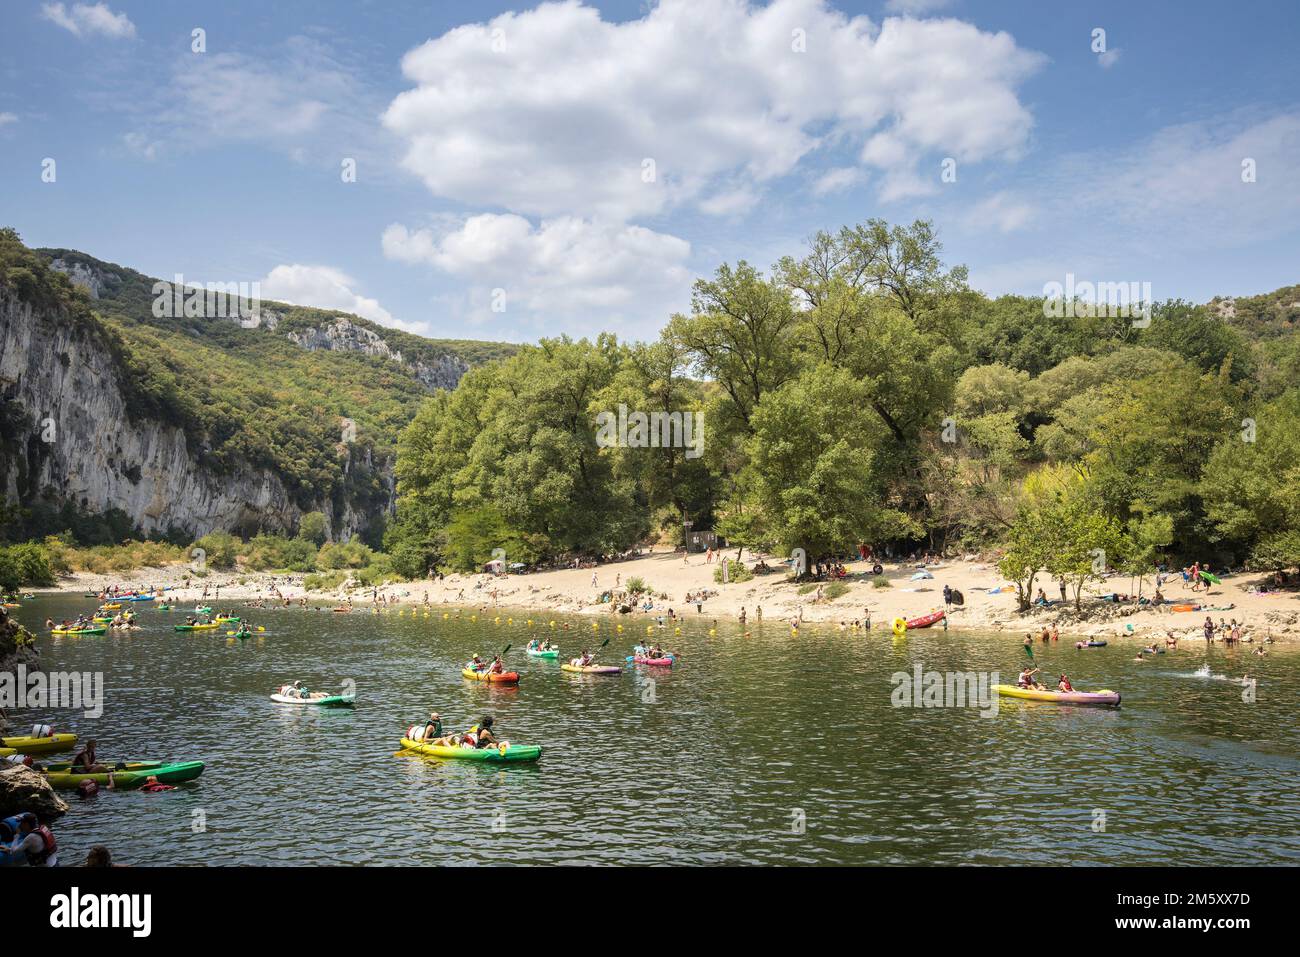 Canoes on the river at Vallon-Pont-d'Arc, Ardeche, France Stock Photo